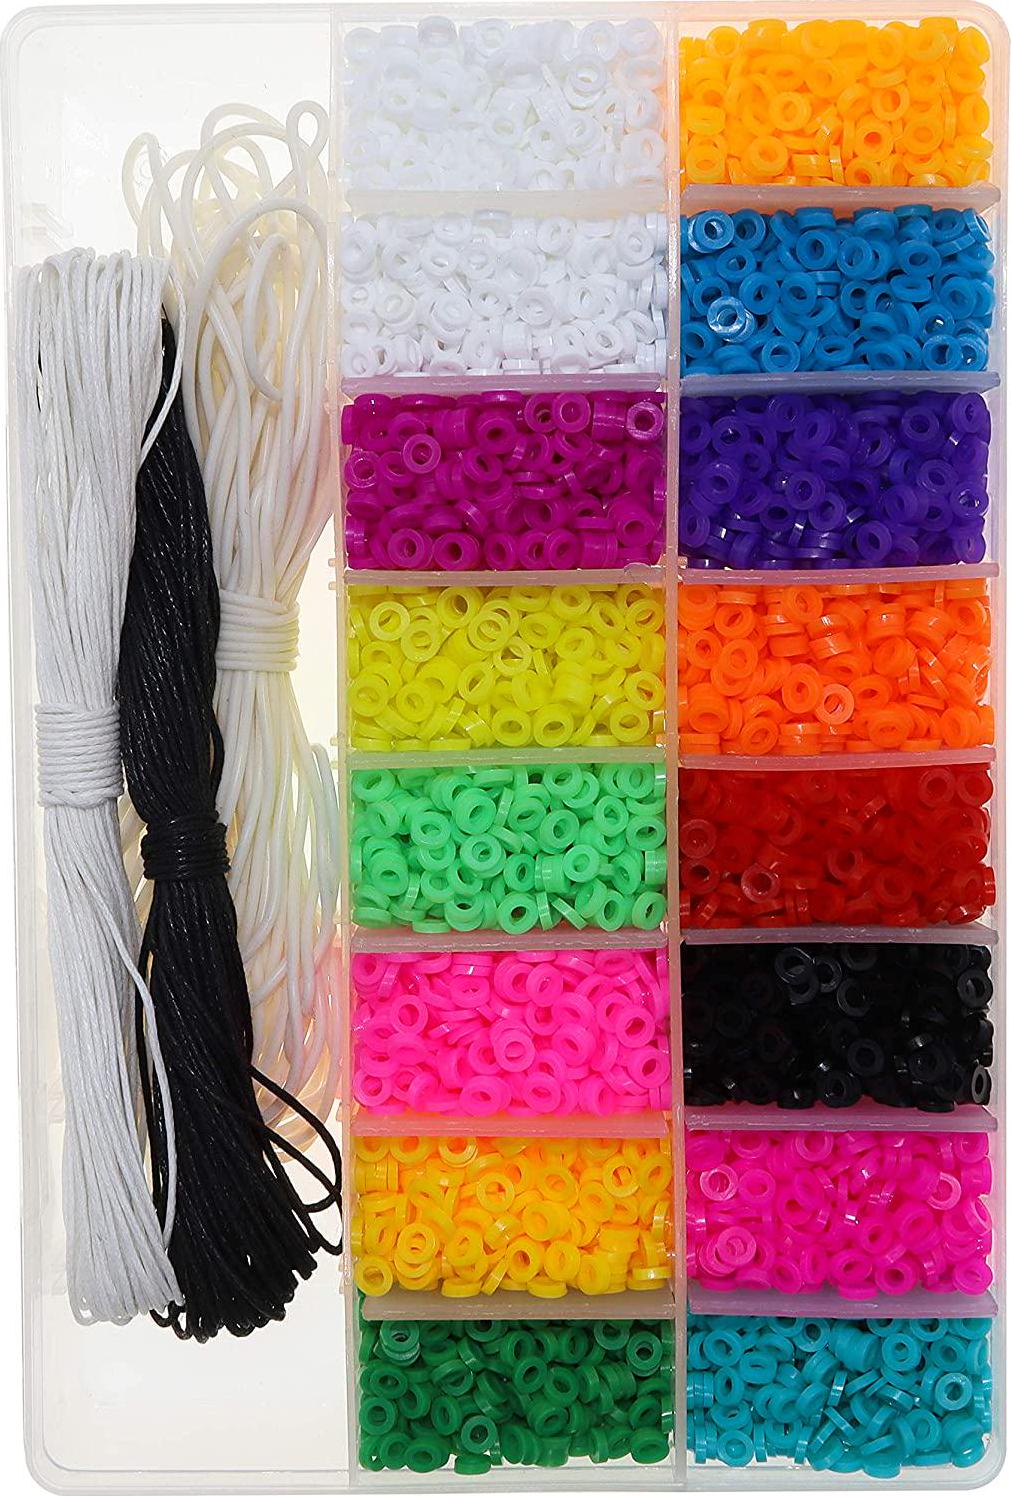 Fun-Weevz, Fun-Weevz 4800 PCS Vinyl Heishi Beads for Jewelry Making Adults, Flat African Disc Bead DIY Kit with 10 Meters Stretch Silicone and Wax Cord Supplies